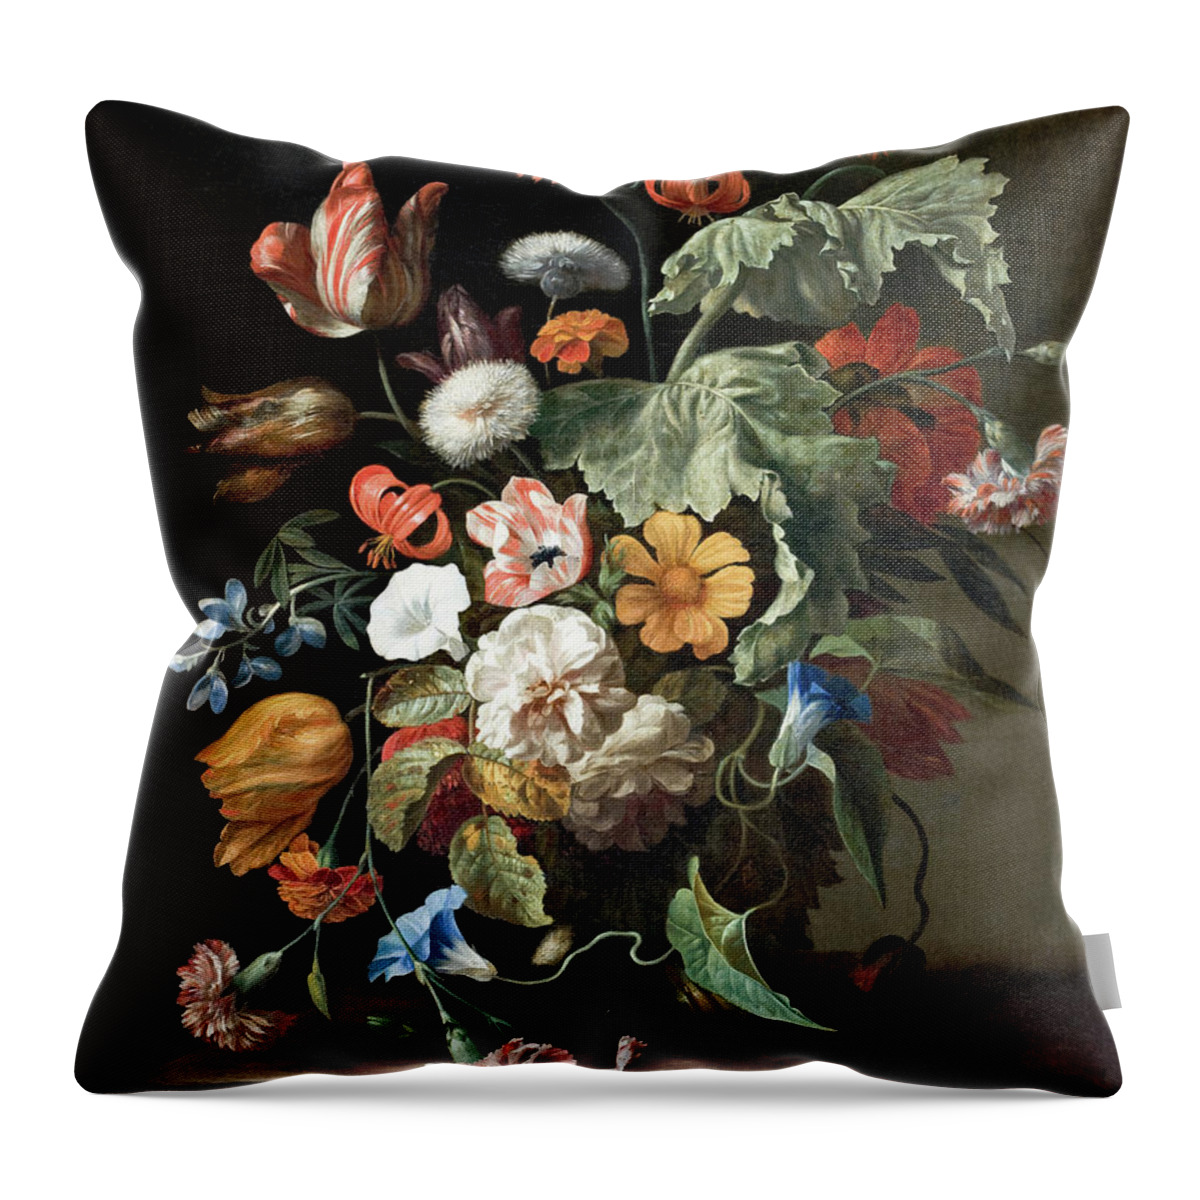 Rachel Throw Pillow featuring the painting Still Life with Flowers #5 by Rachel Ruysch